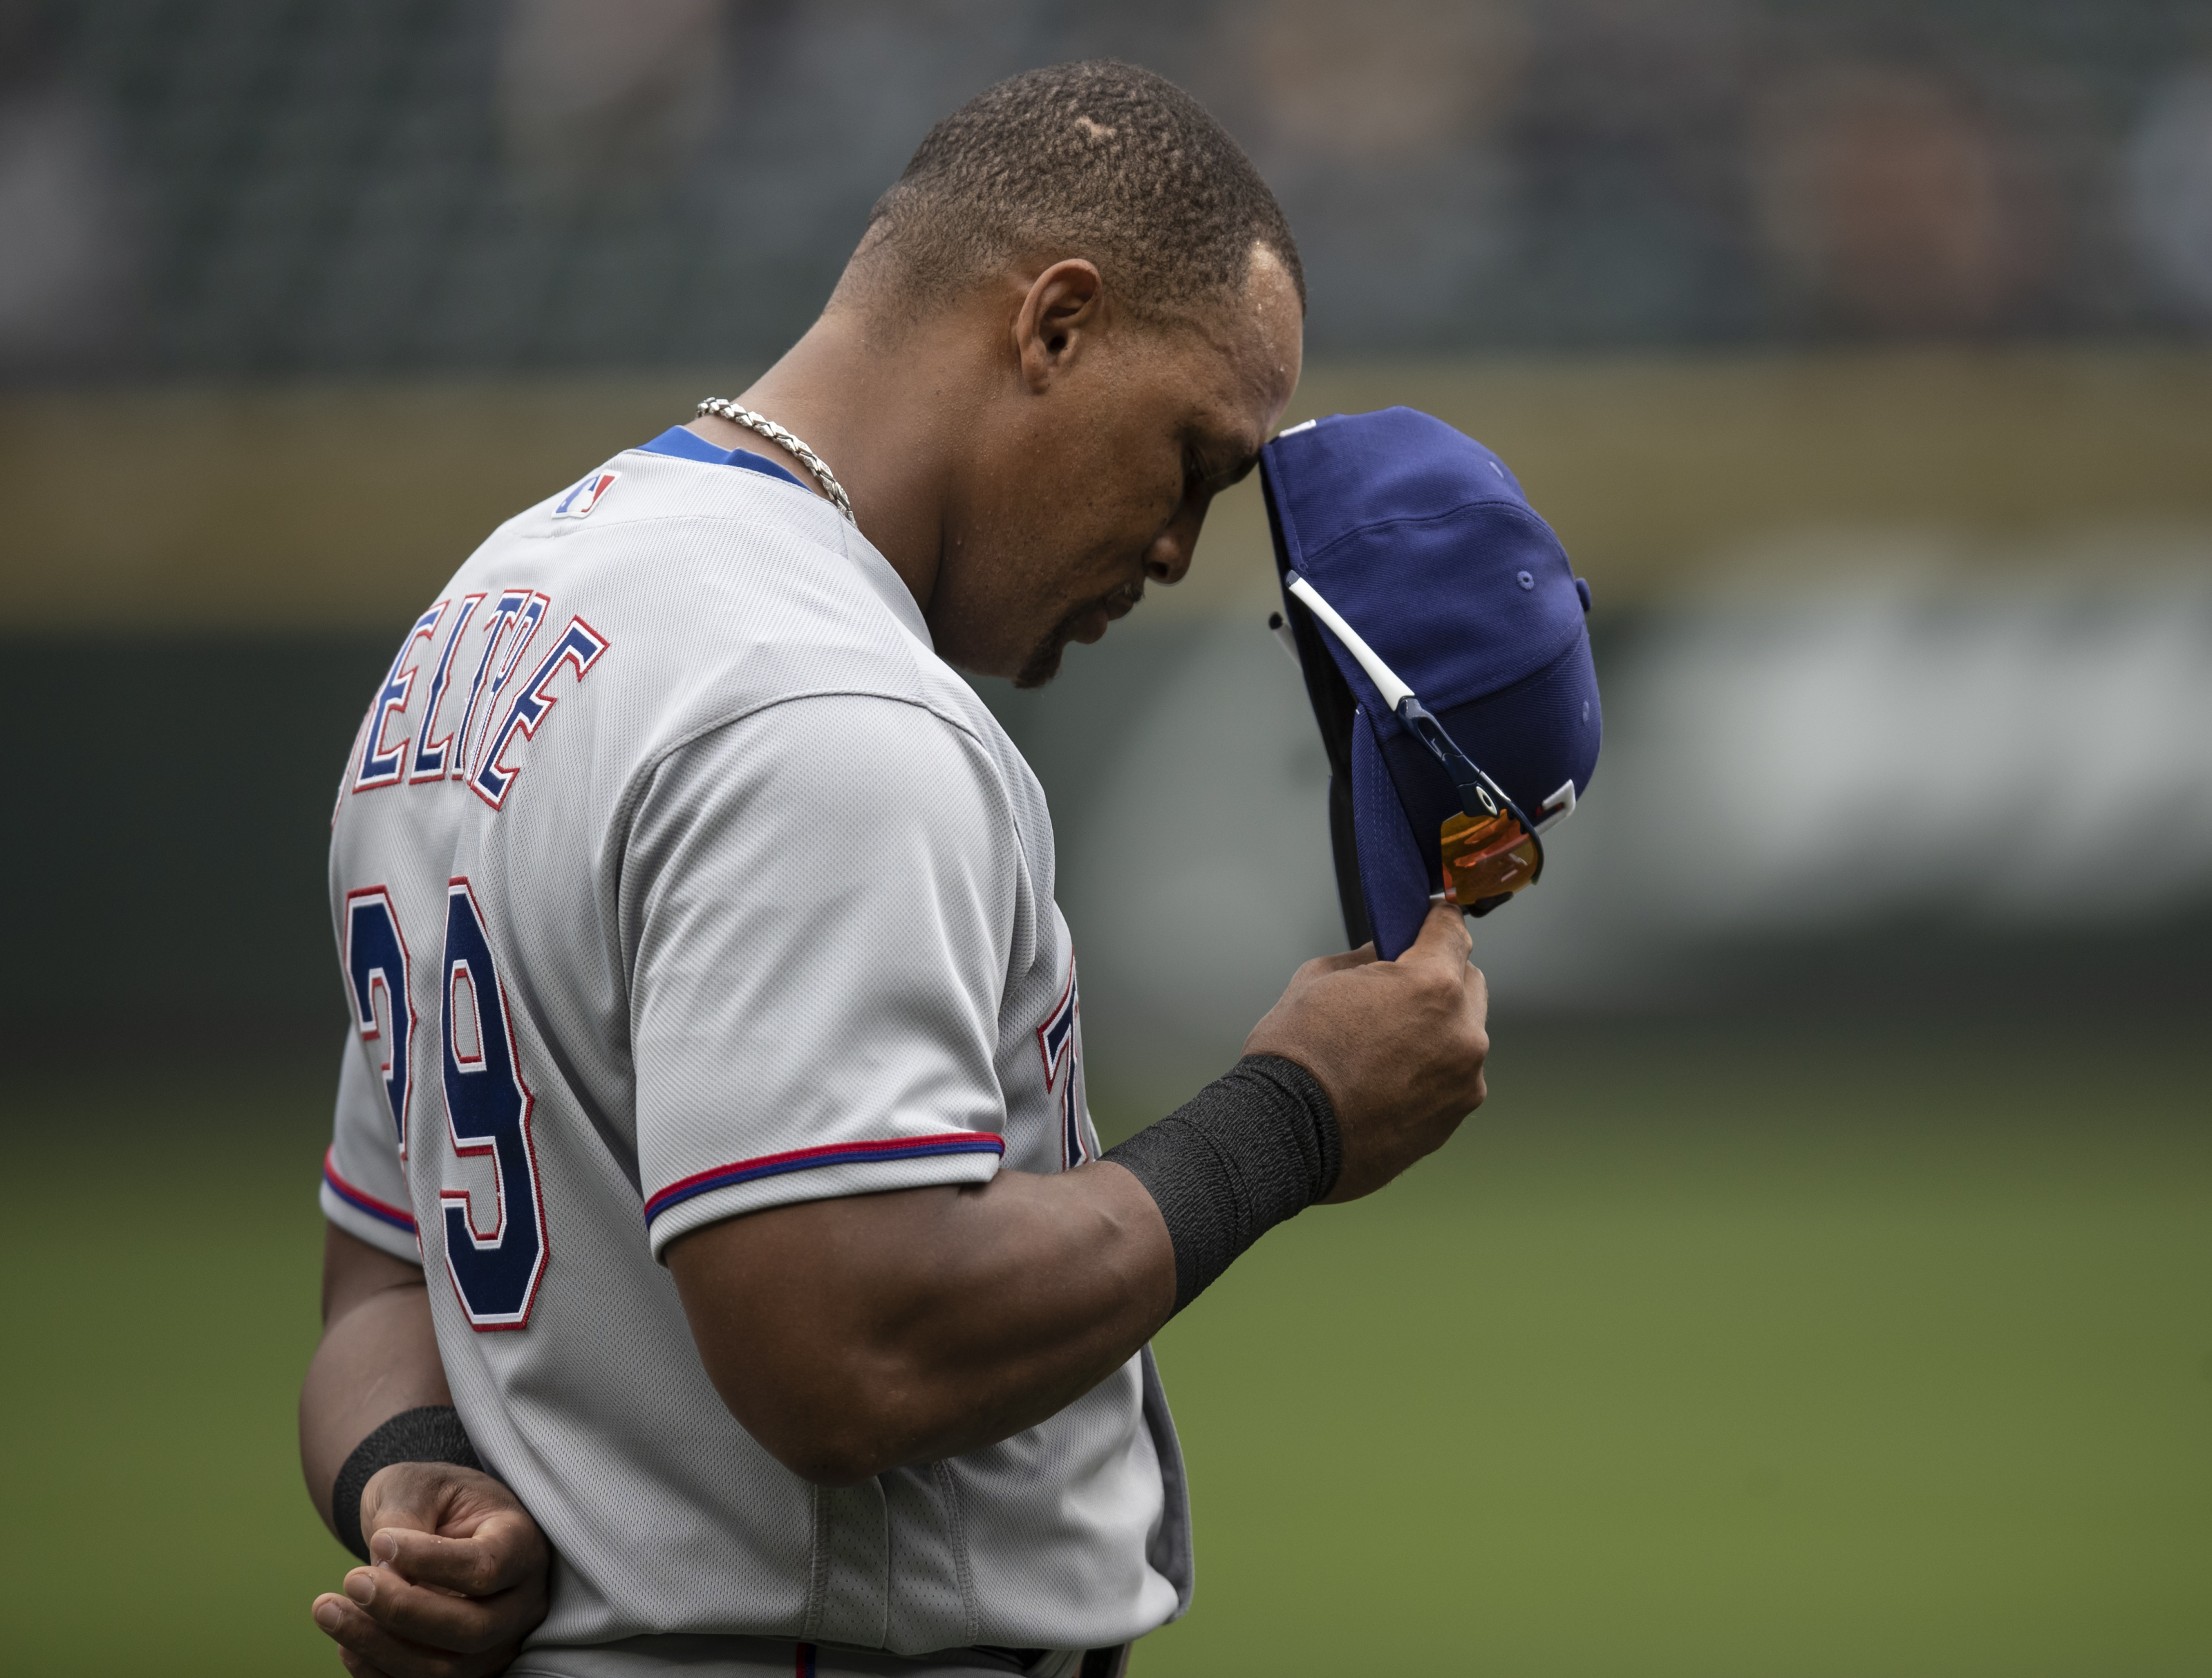 Adrian Beltre and his Hall of Fame candidacy